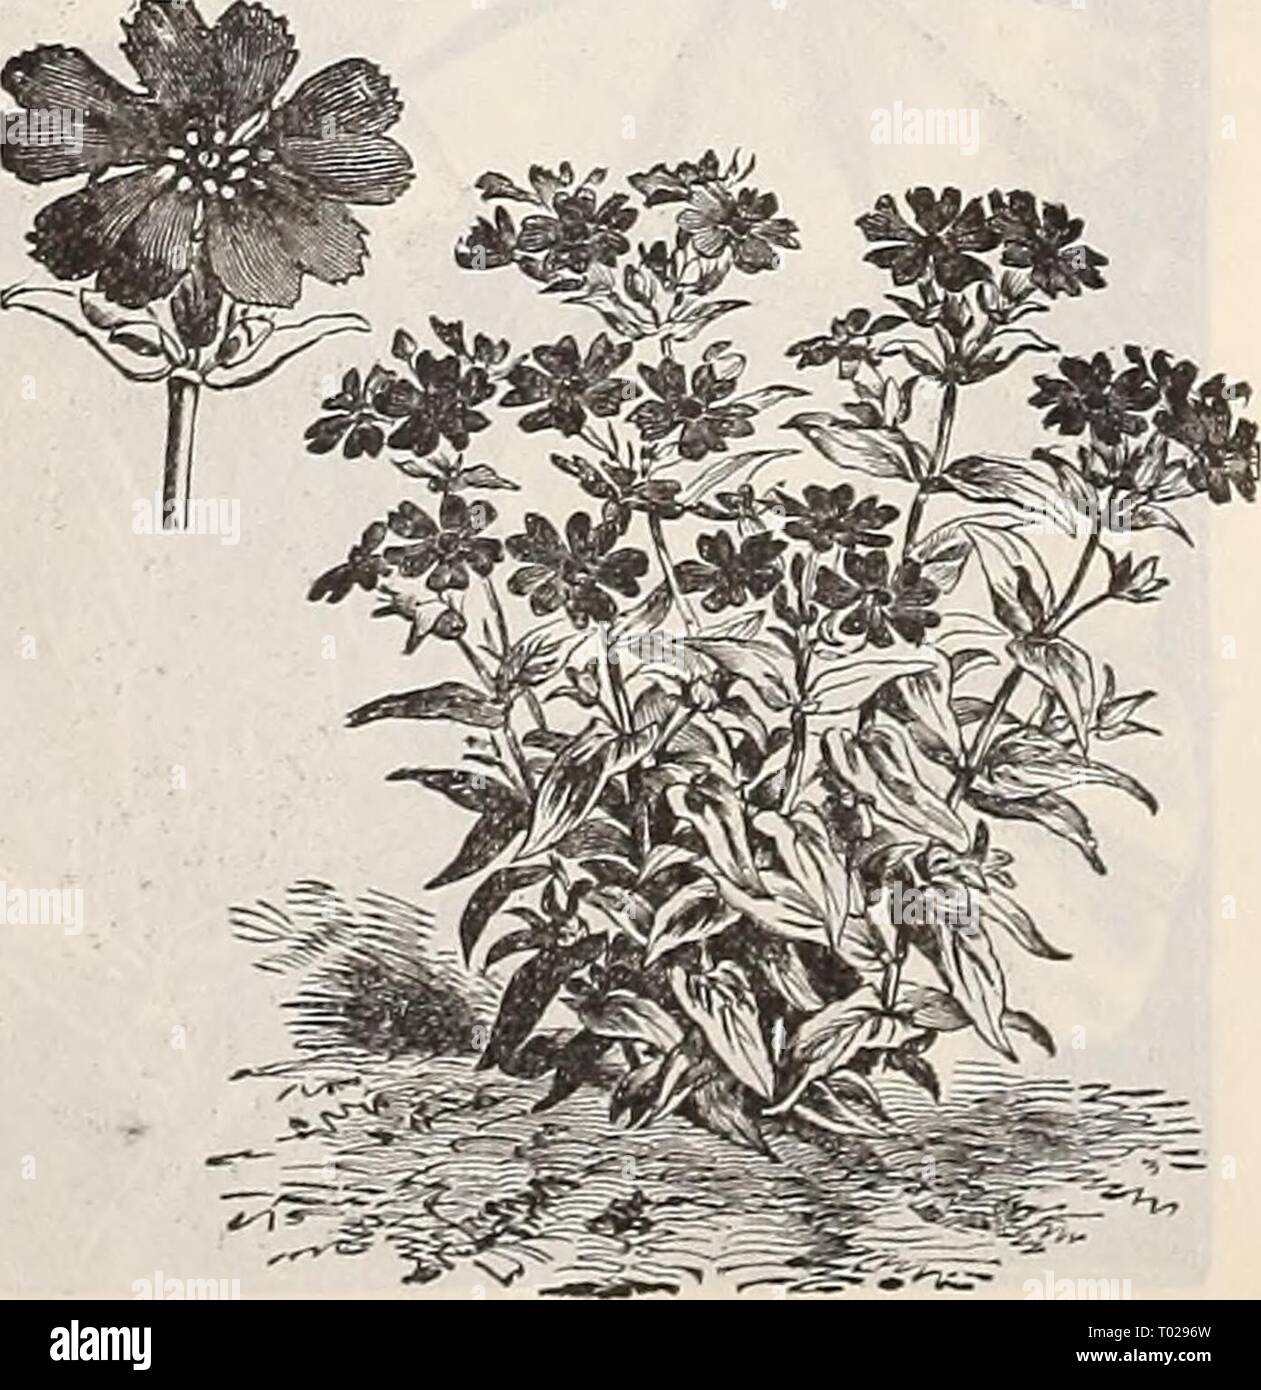 Dreer's garden calendar : 1899 . dreersgardencale1899henr Year: 1899  Lantana. LmXTM. One of the most effective and showy bedding plants of long duration, having tine foliage and delicate stems. PER pkt. 6017 Linum Coccineum. (Scarlet Flax.) Brilliant scarlet crimson ; hardy annual ; 1 foot 5 601 â ;' â Flavum. Golden-yellow; per- ennial 5 LOPHOSPERMIM. Highly ornamental annual climber, with showy foxglove-like flowers; 10 feet. 0035 Lophospermum Scandens. Rosy purple ,,,,.,,,... 10 LUPINUS. Ornamental free-flowering, easily-grown garden plants, with long, graceful spikes of rich and various-c Stock Photo